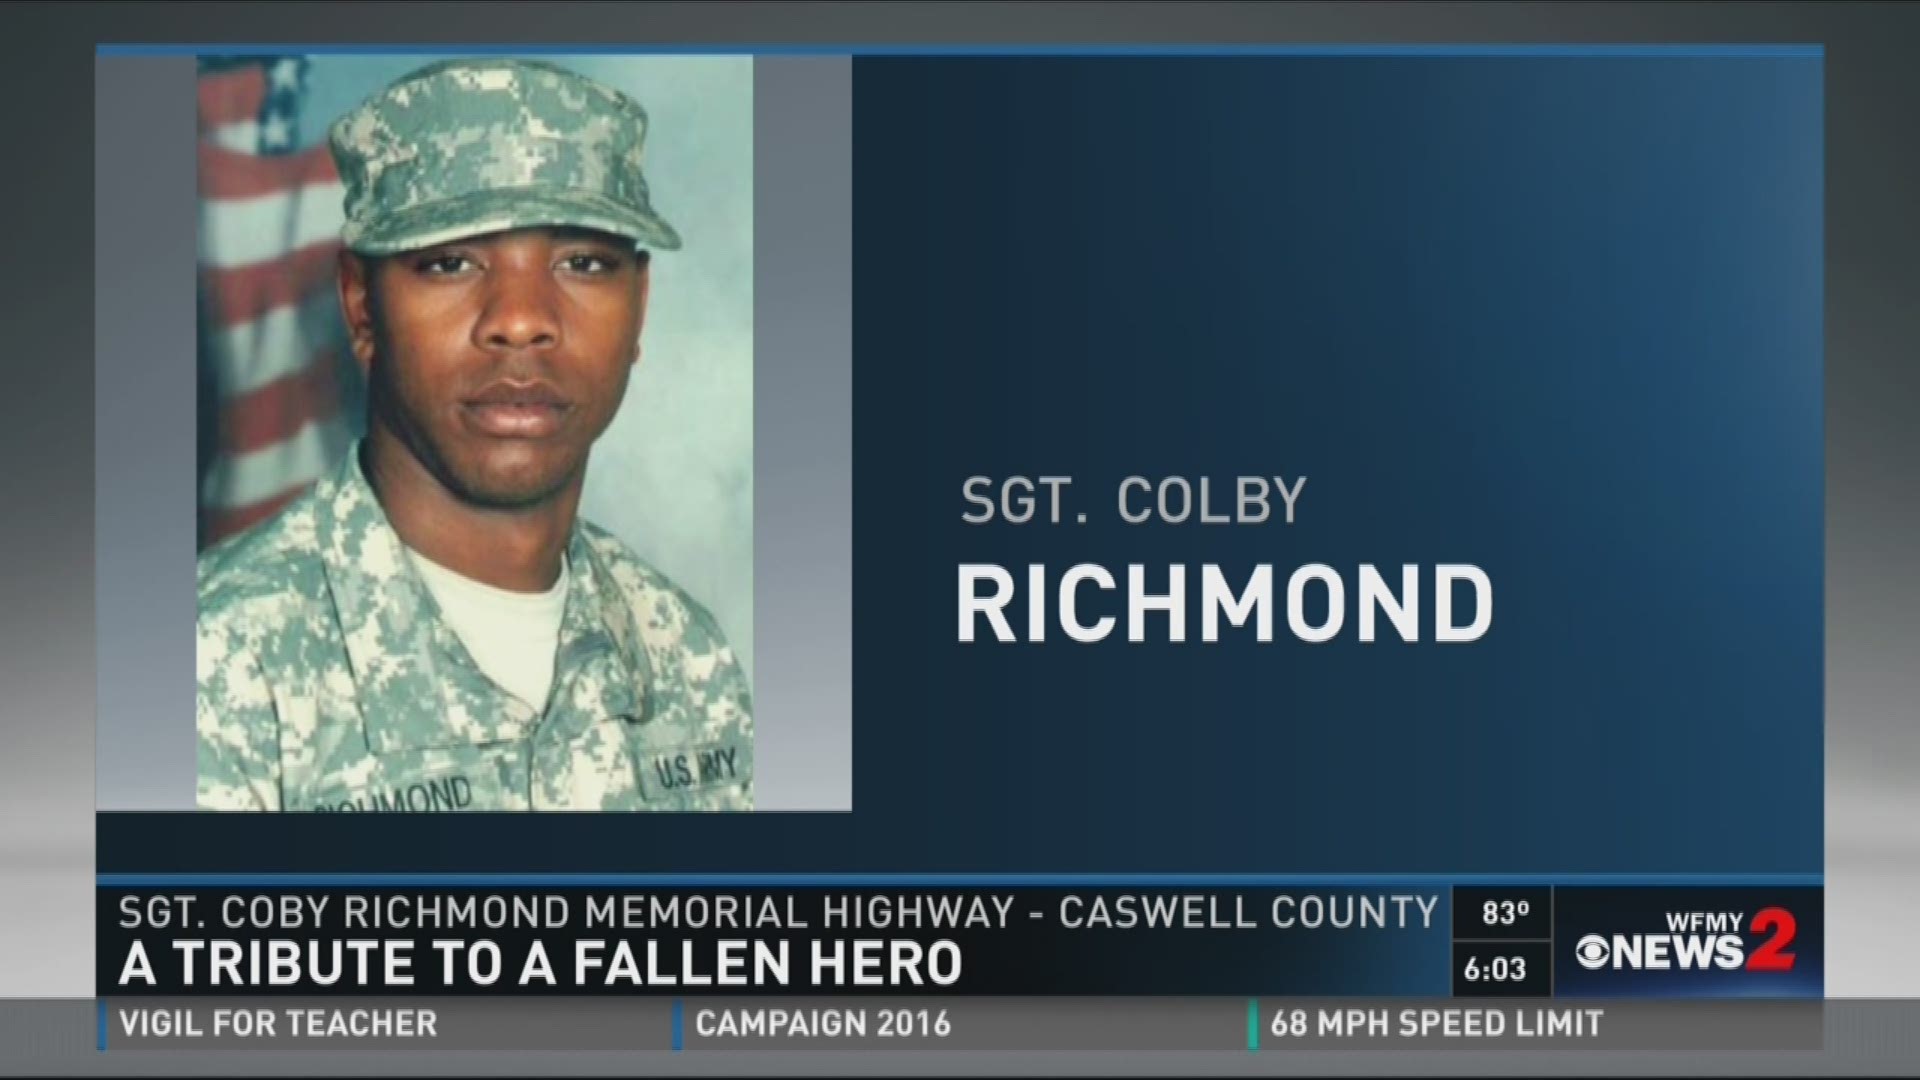 Sgt. Coby Richmond Memorial Highway: A Tribute To A Fallen Hero